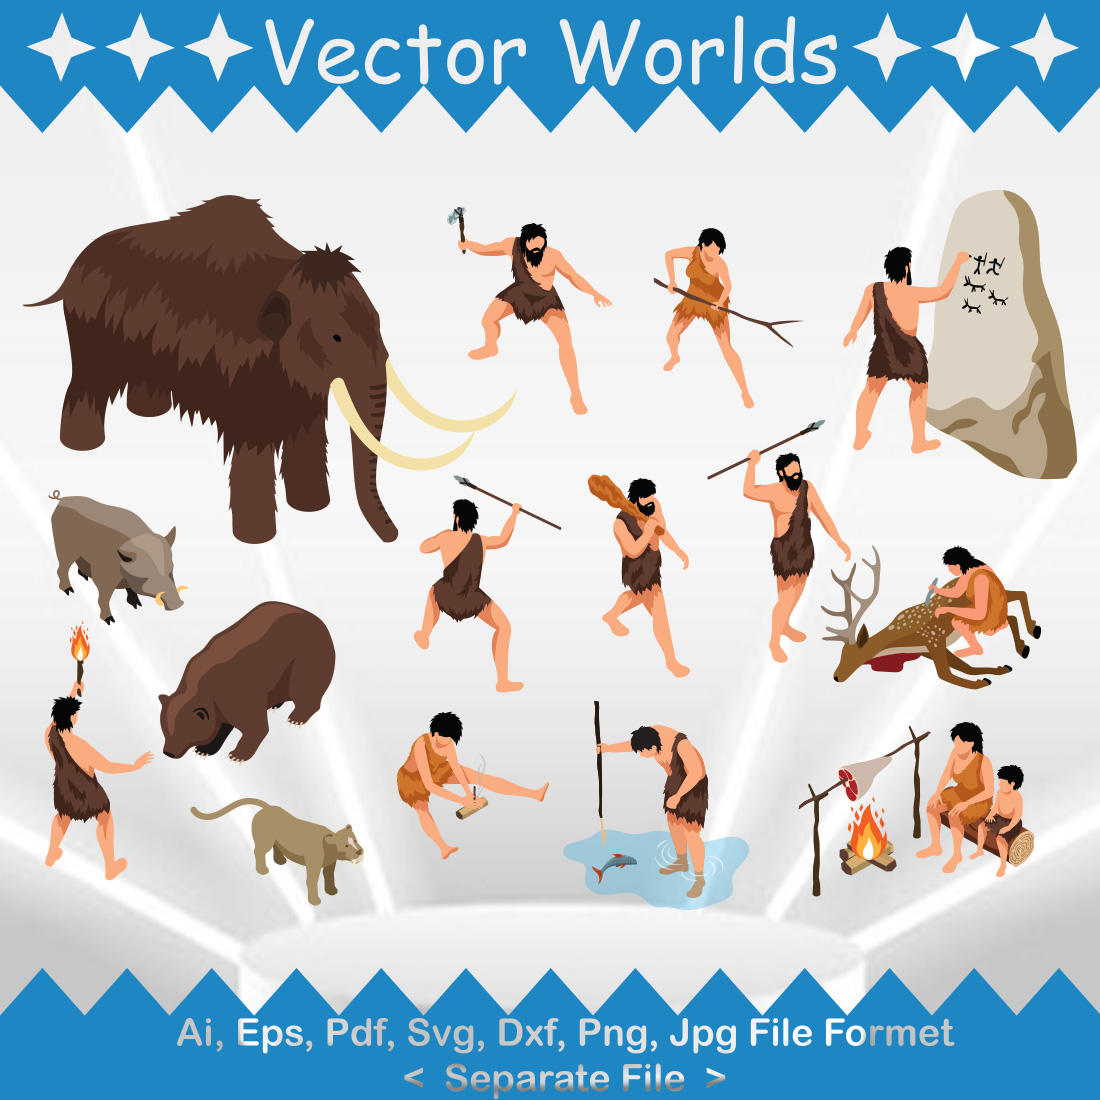 The Great Ice Age SVG Vector Design cover image.